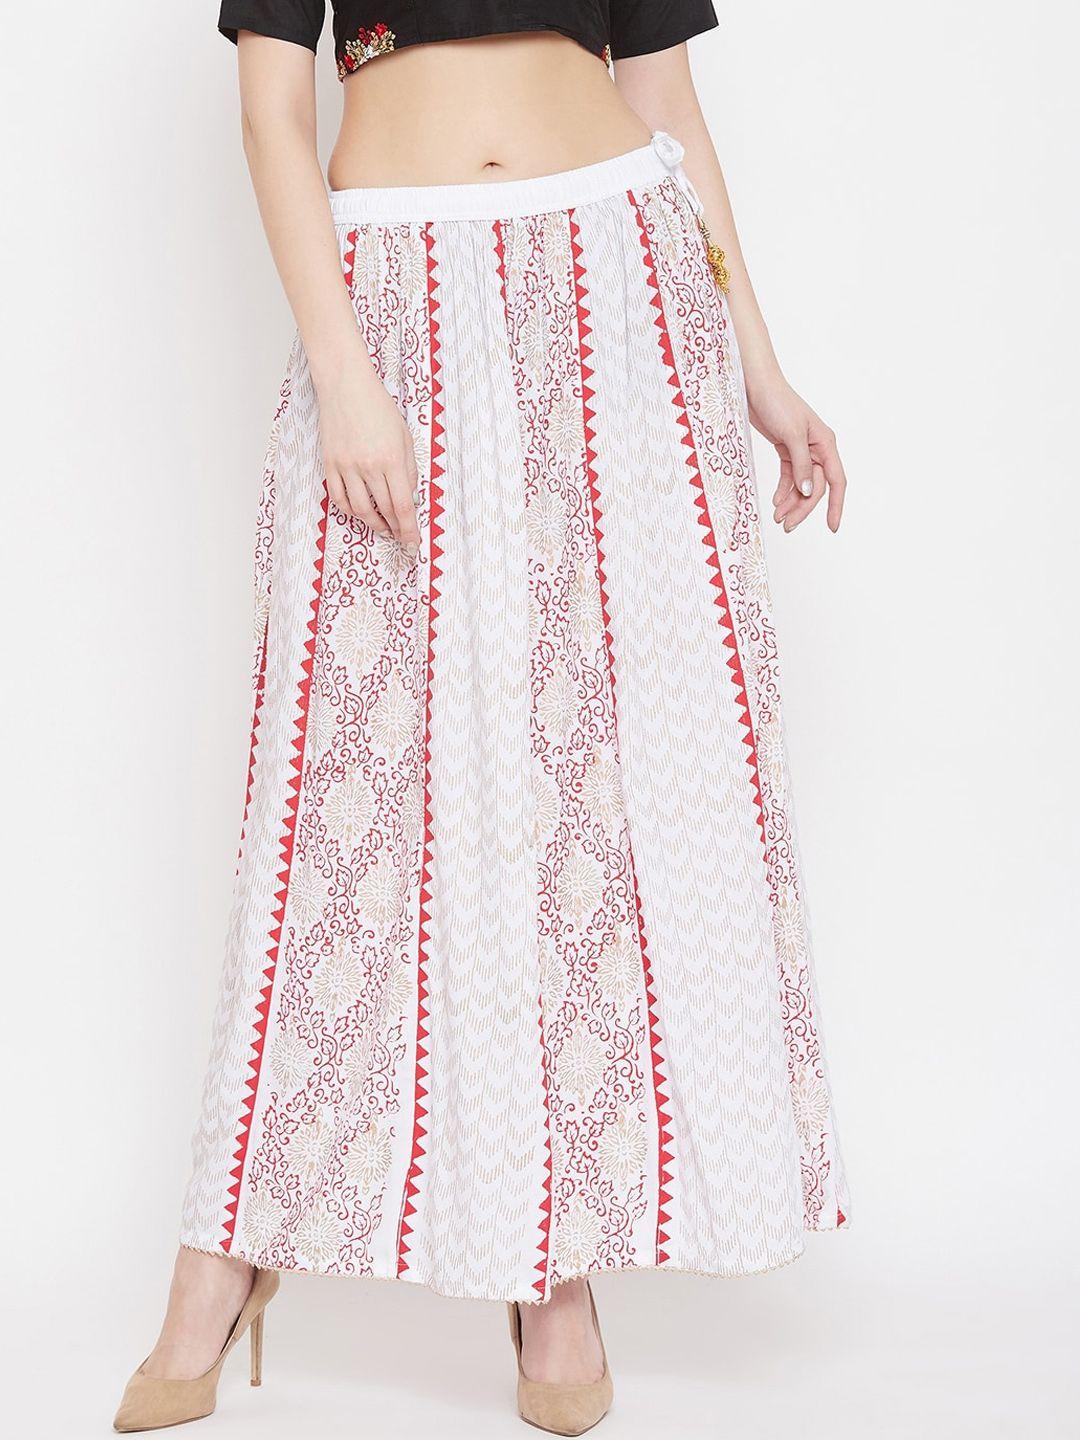 clora-creation-women-white-&-red-printed-flared-maxi-skirt